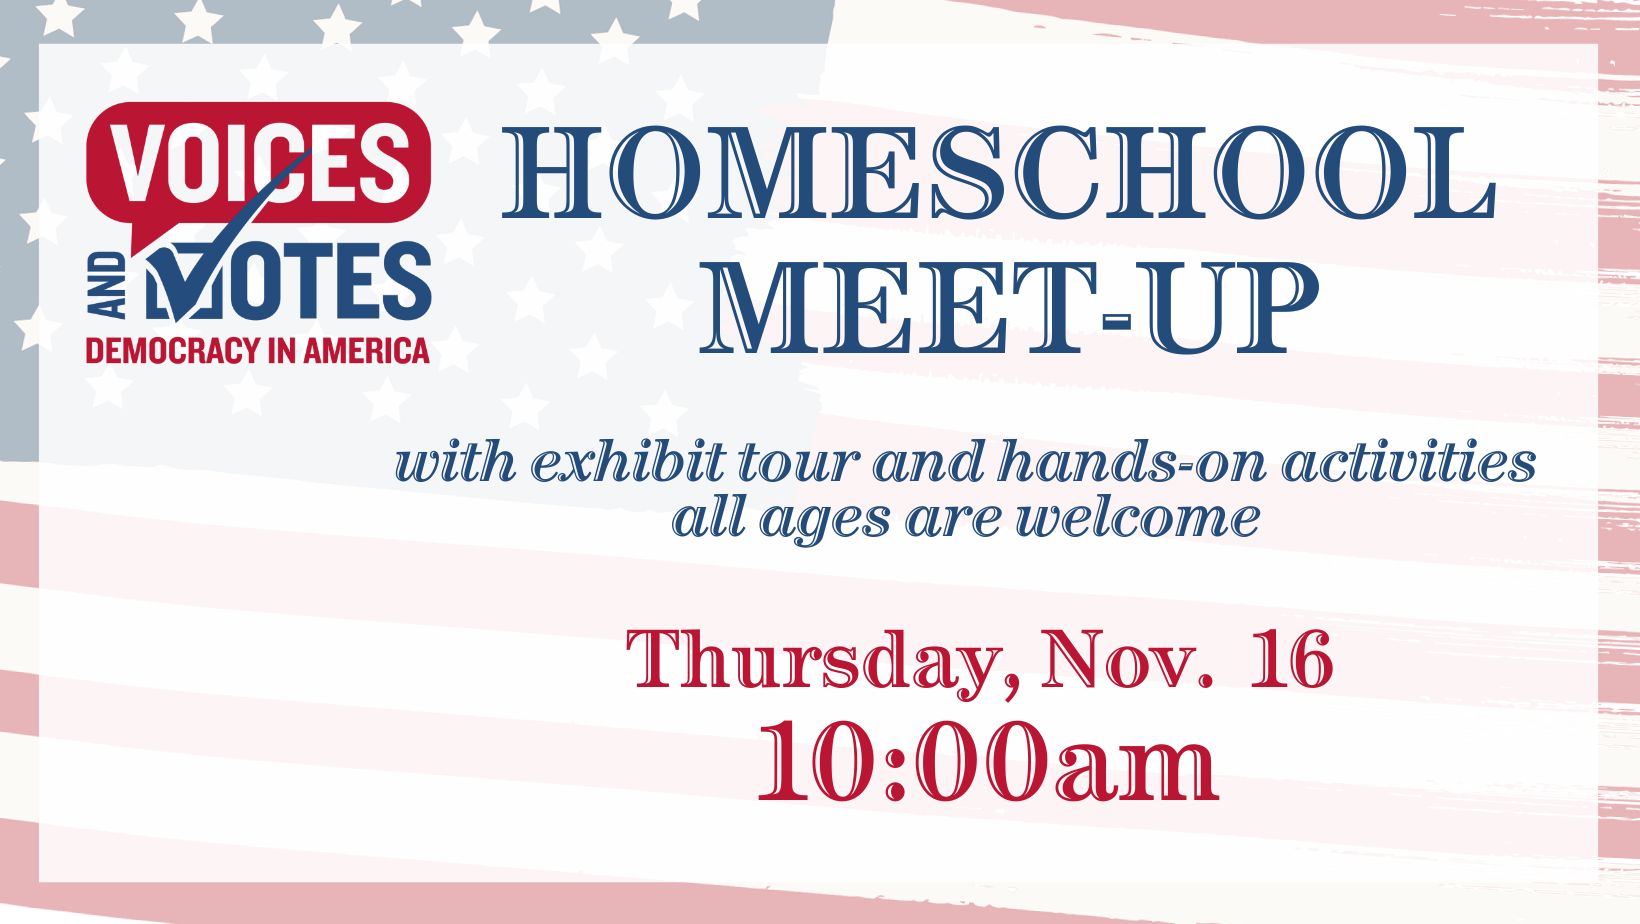 Background image is American flag with text reading Homeschool Meet-Up